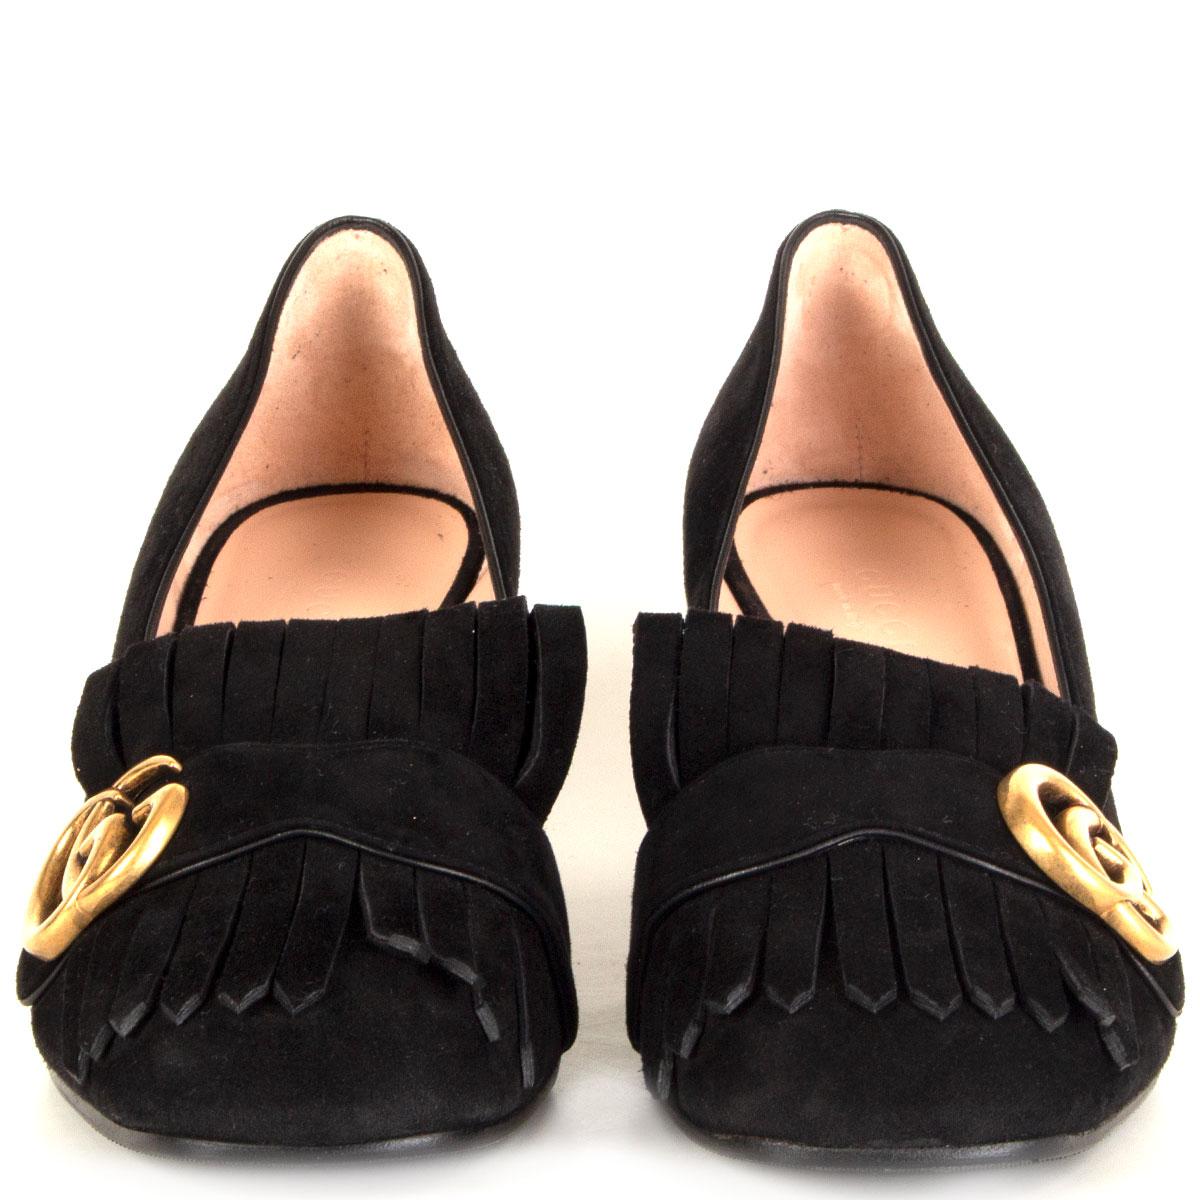 100% authentic Gucci Marmont fringed block-heel loafers in black suede featuring GG buckle logo in antique gold-tone metal. Brand new. Black rubber sole got added. 

Measurements
Imprinted Size	38
Shoe Size	38
Inside Sole	25cm (9.8in)
Width	7.5cm